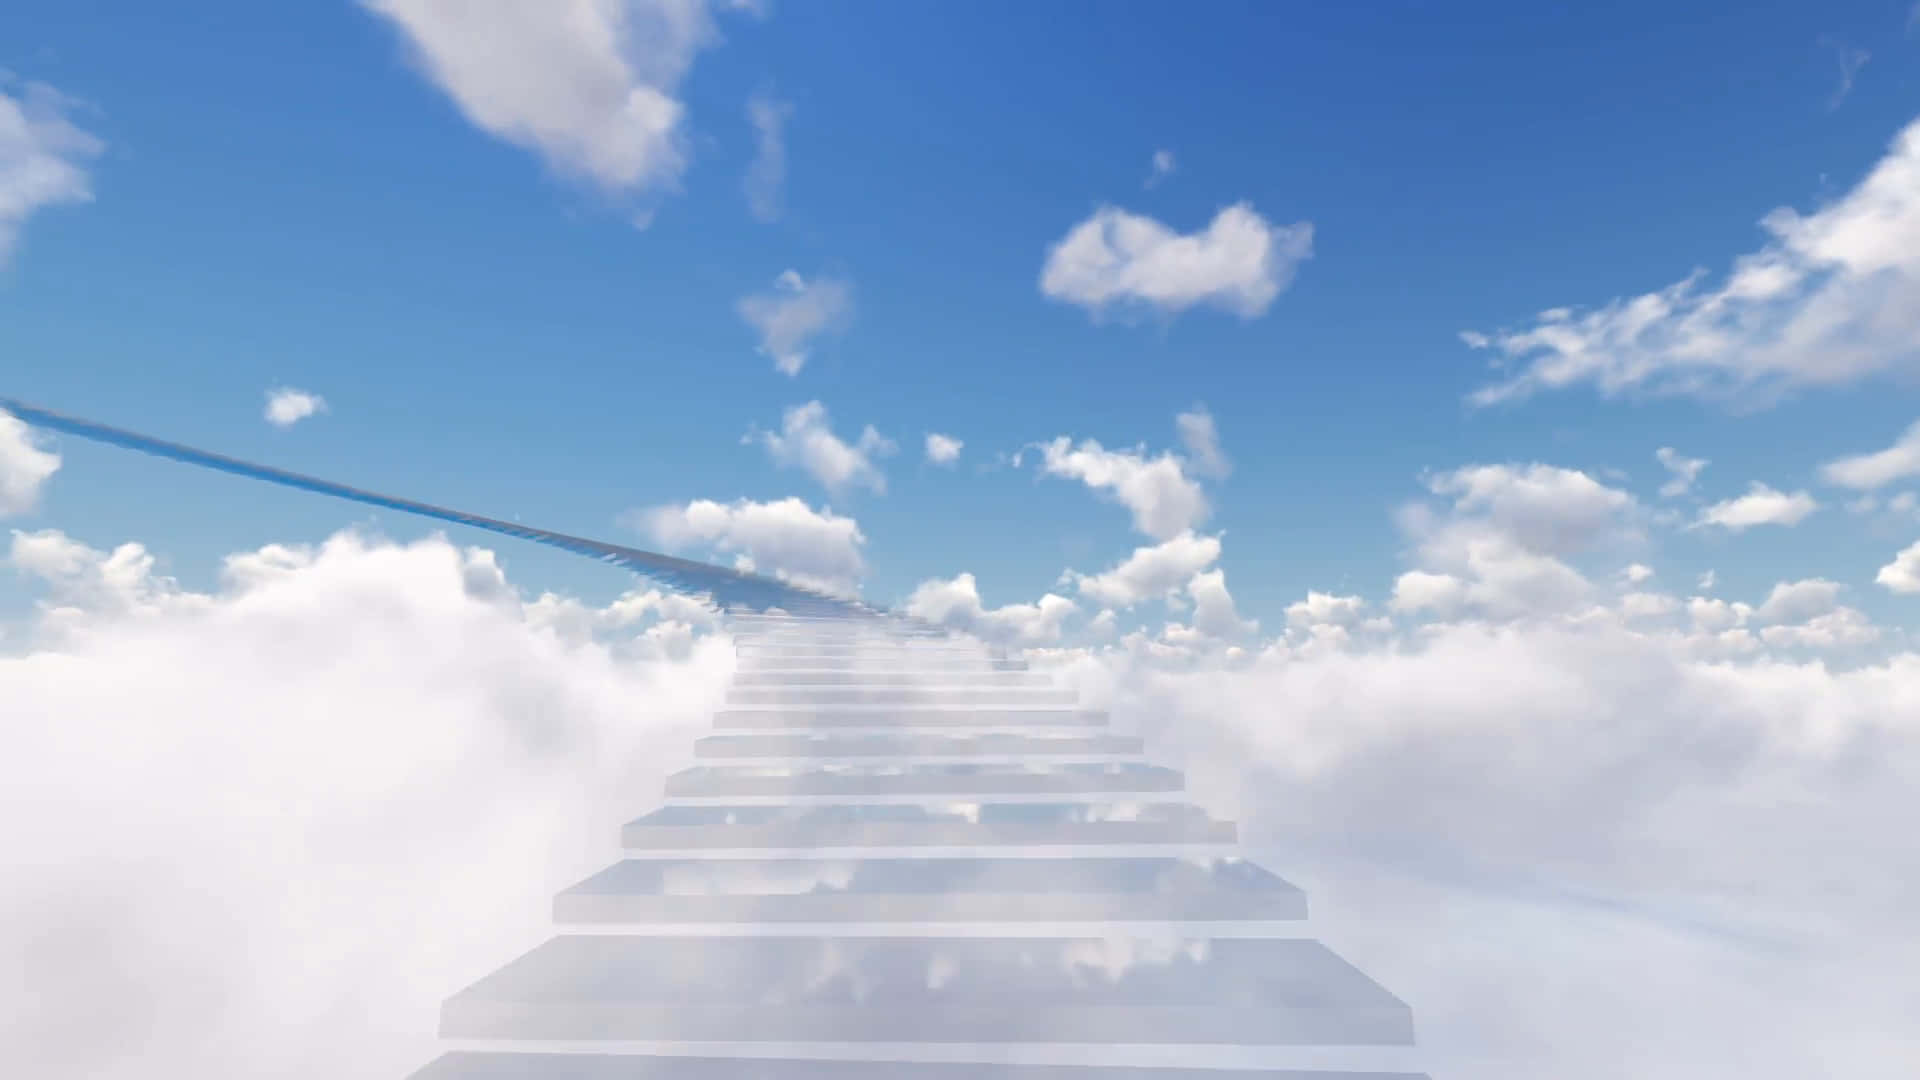 “taking The Path Less Traveled - Stairway To Heaven”